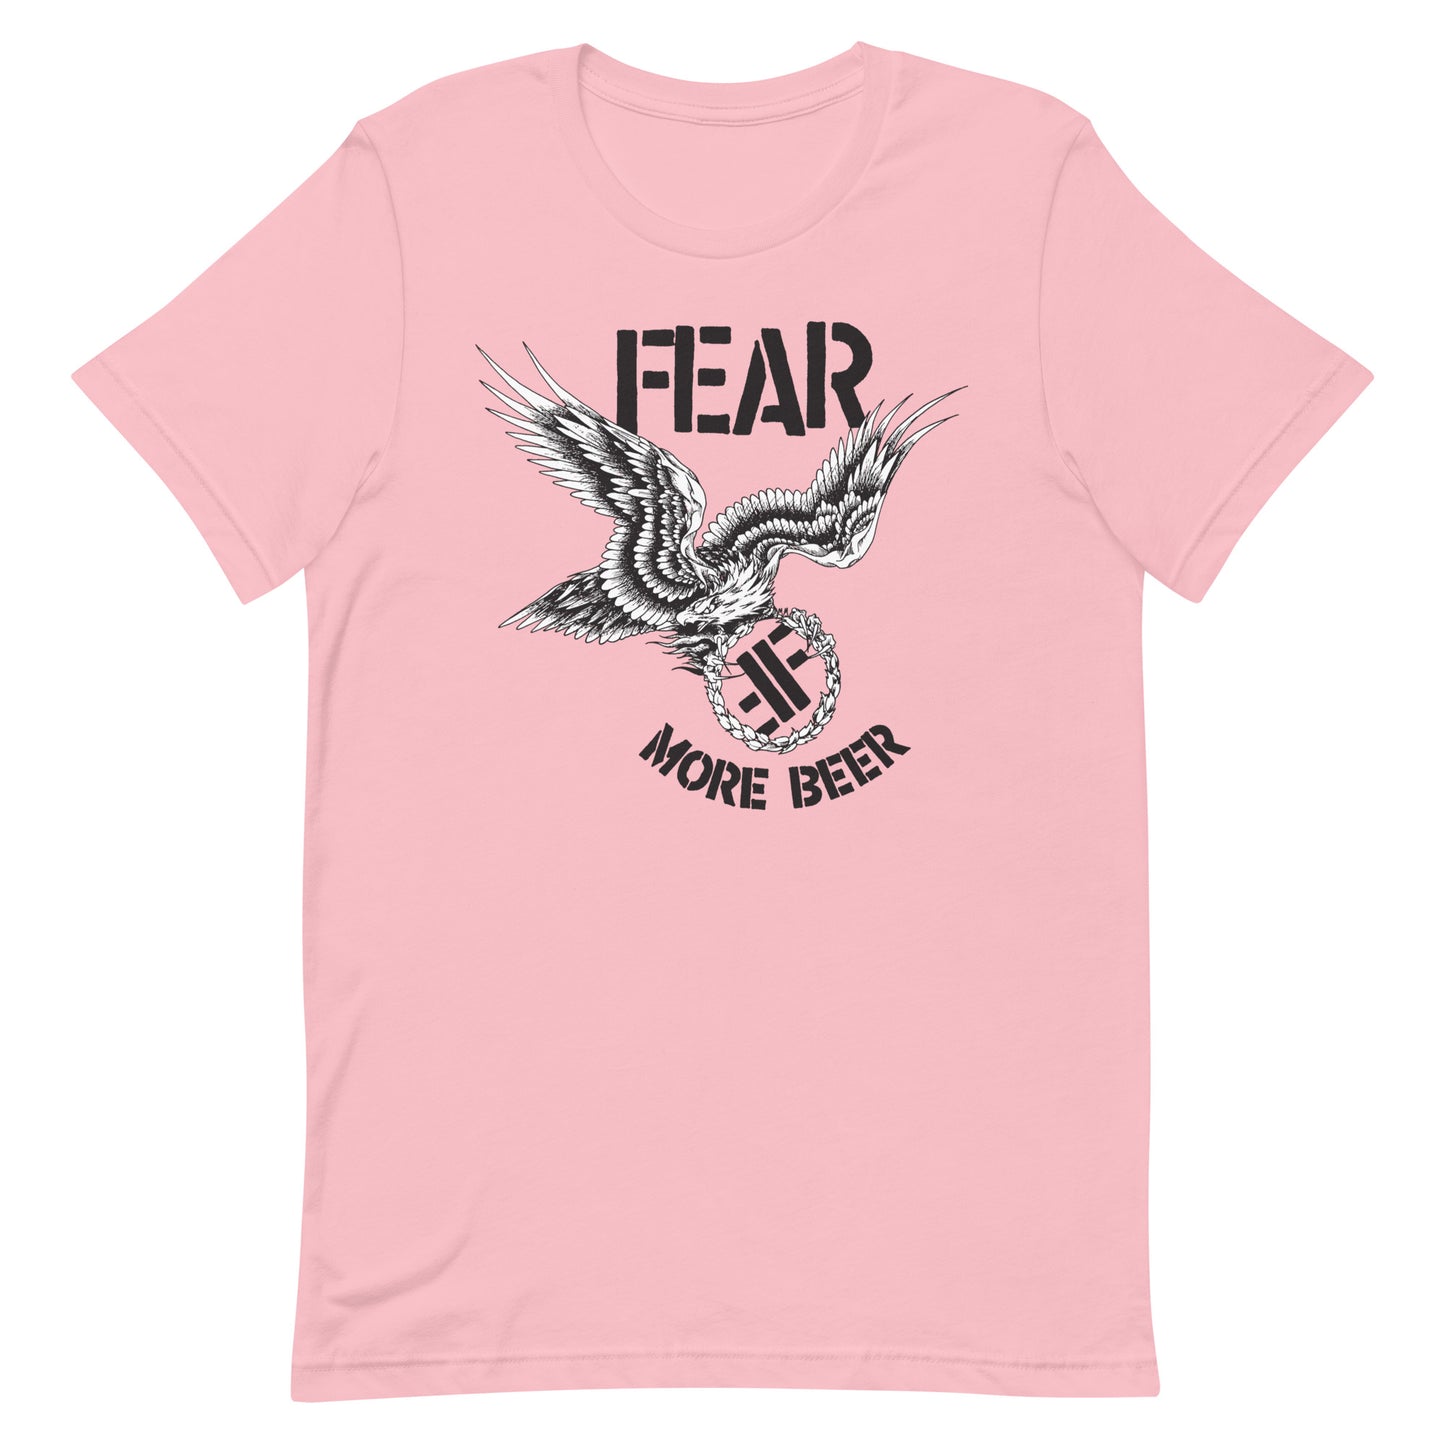 Fear - More Beer T-Shirt